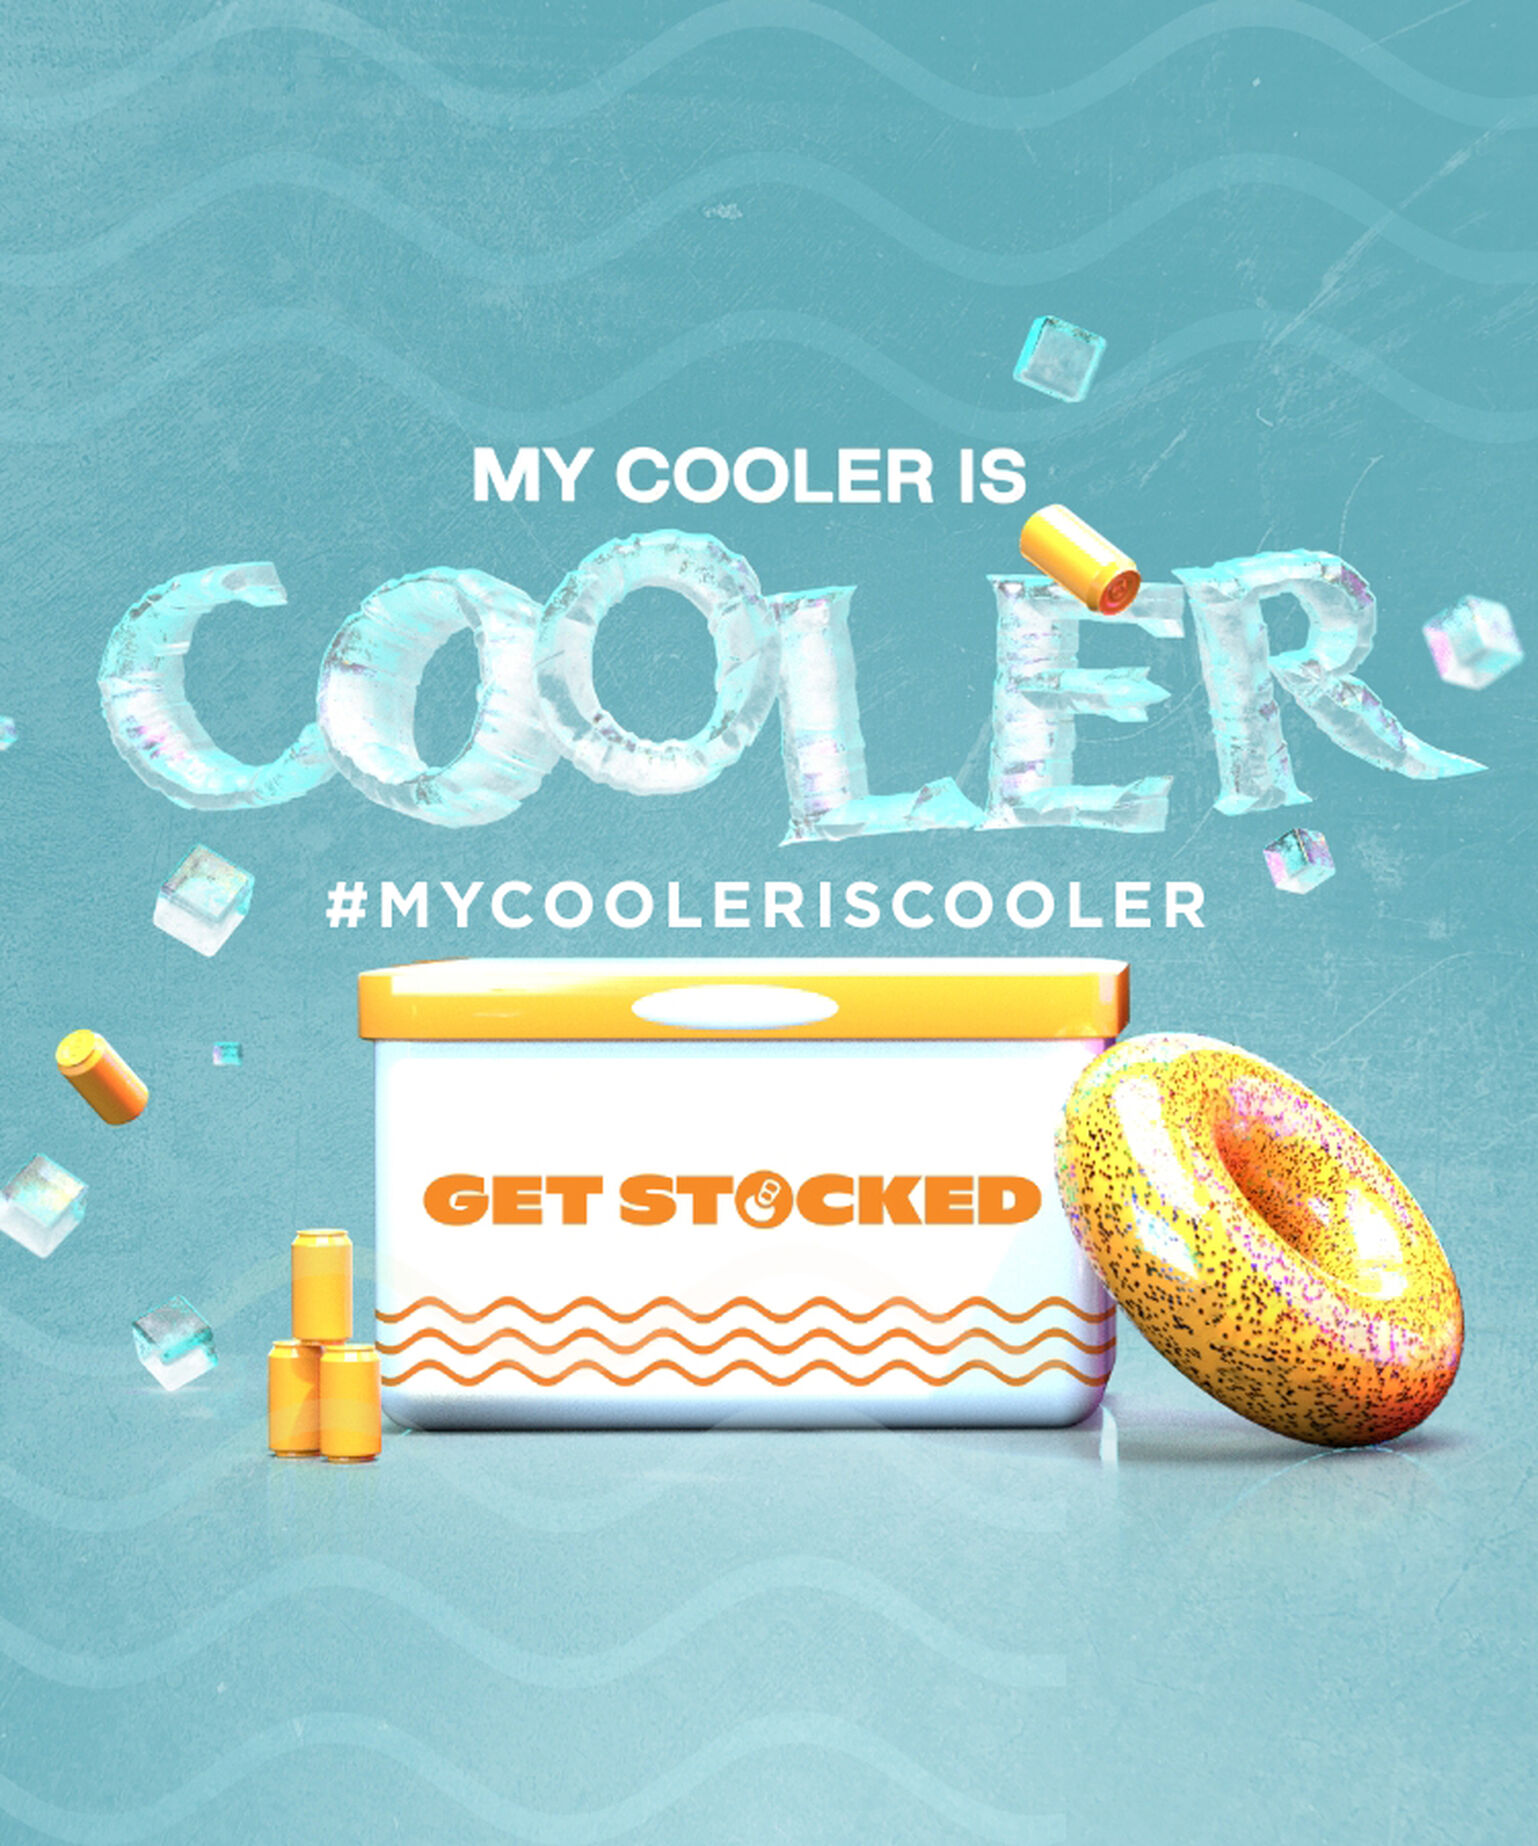 "My Cooler is Cooler" sign underwater with a cooler, cans, and pool floats